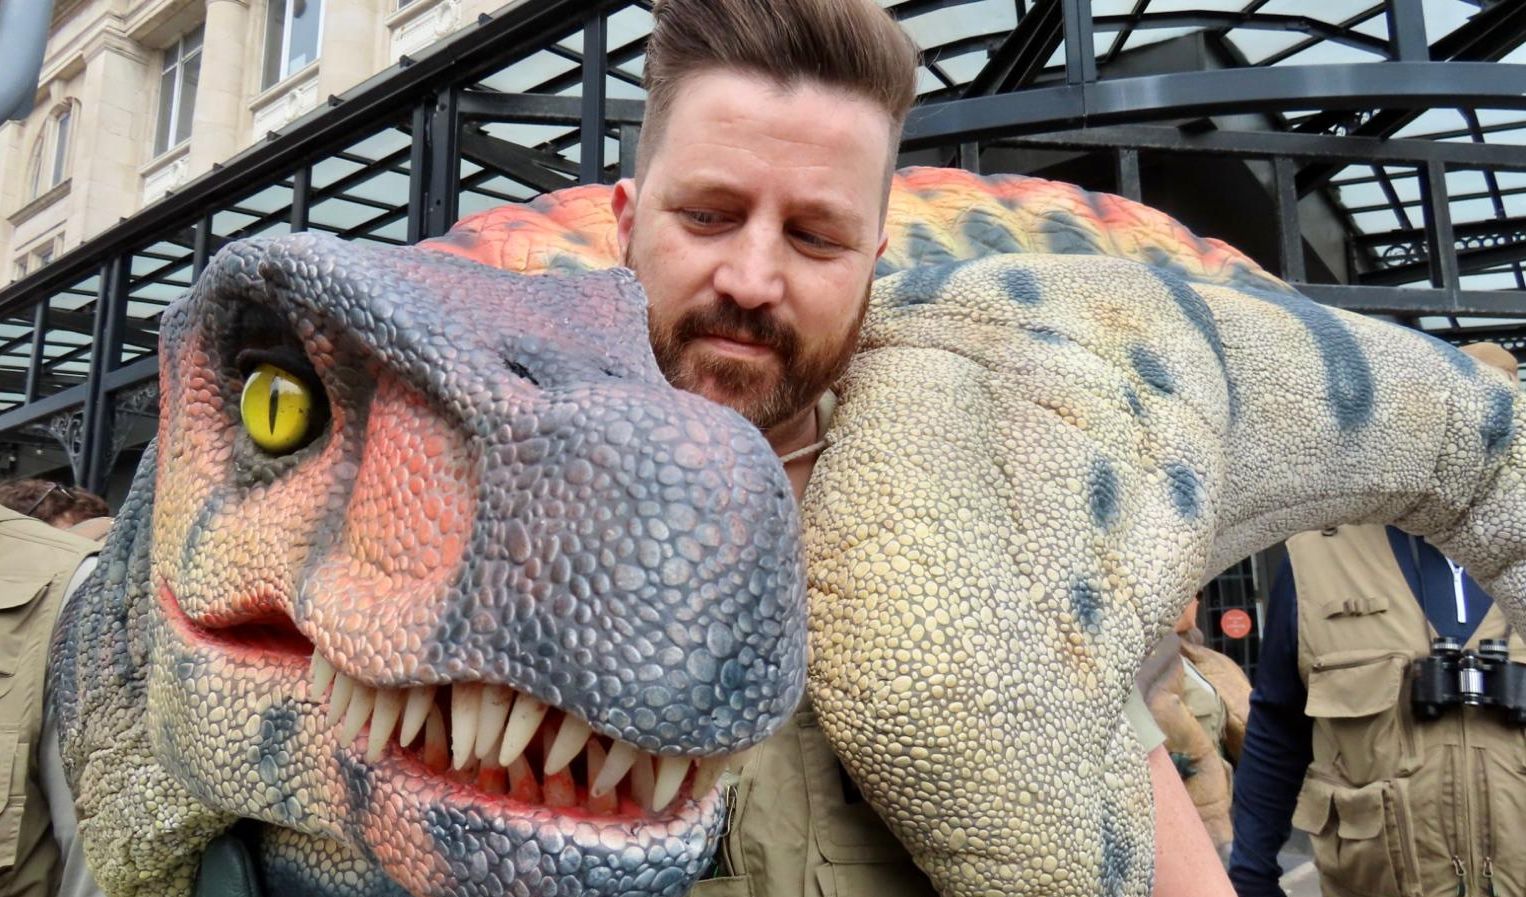 G Models and Casting Agency brought some of their anamatronic dinosaurs to meet families on the final day of the Southport BID DinoTown attraction. Photo by Andrew Brown Stand Up For Southport